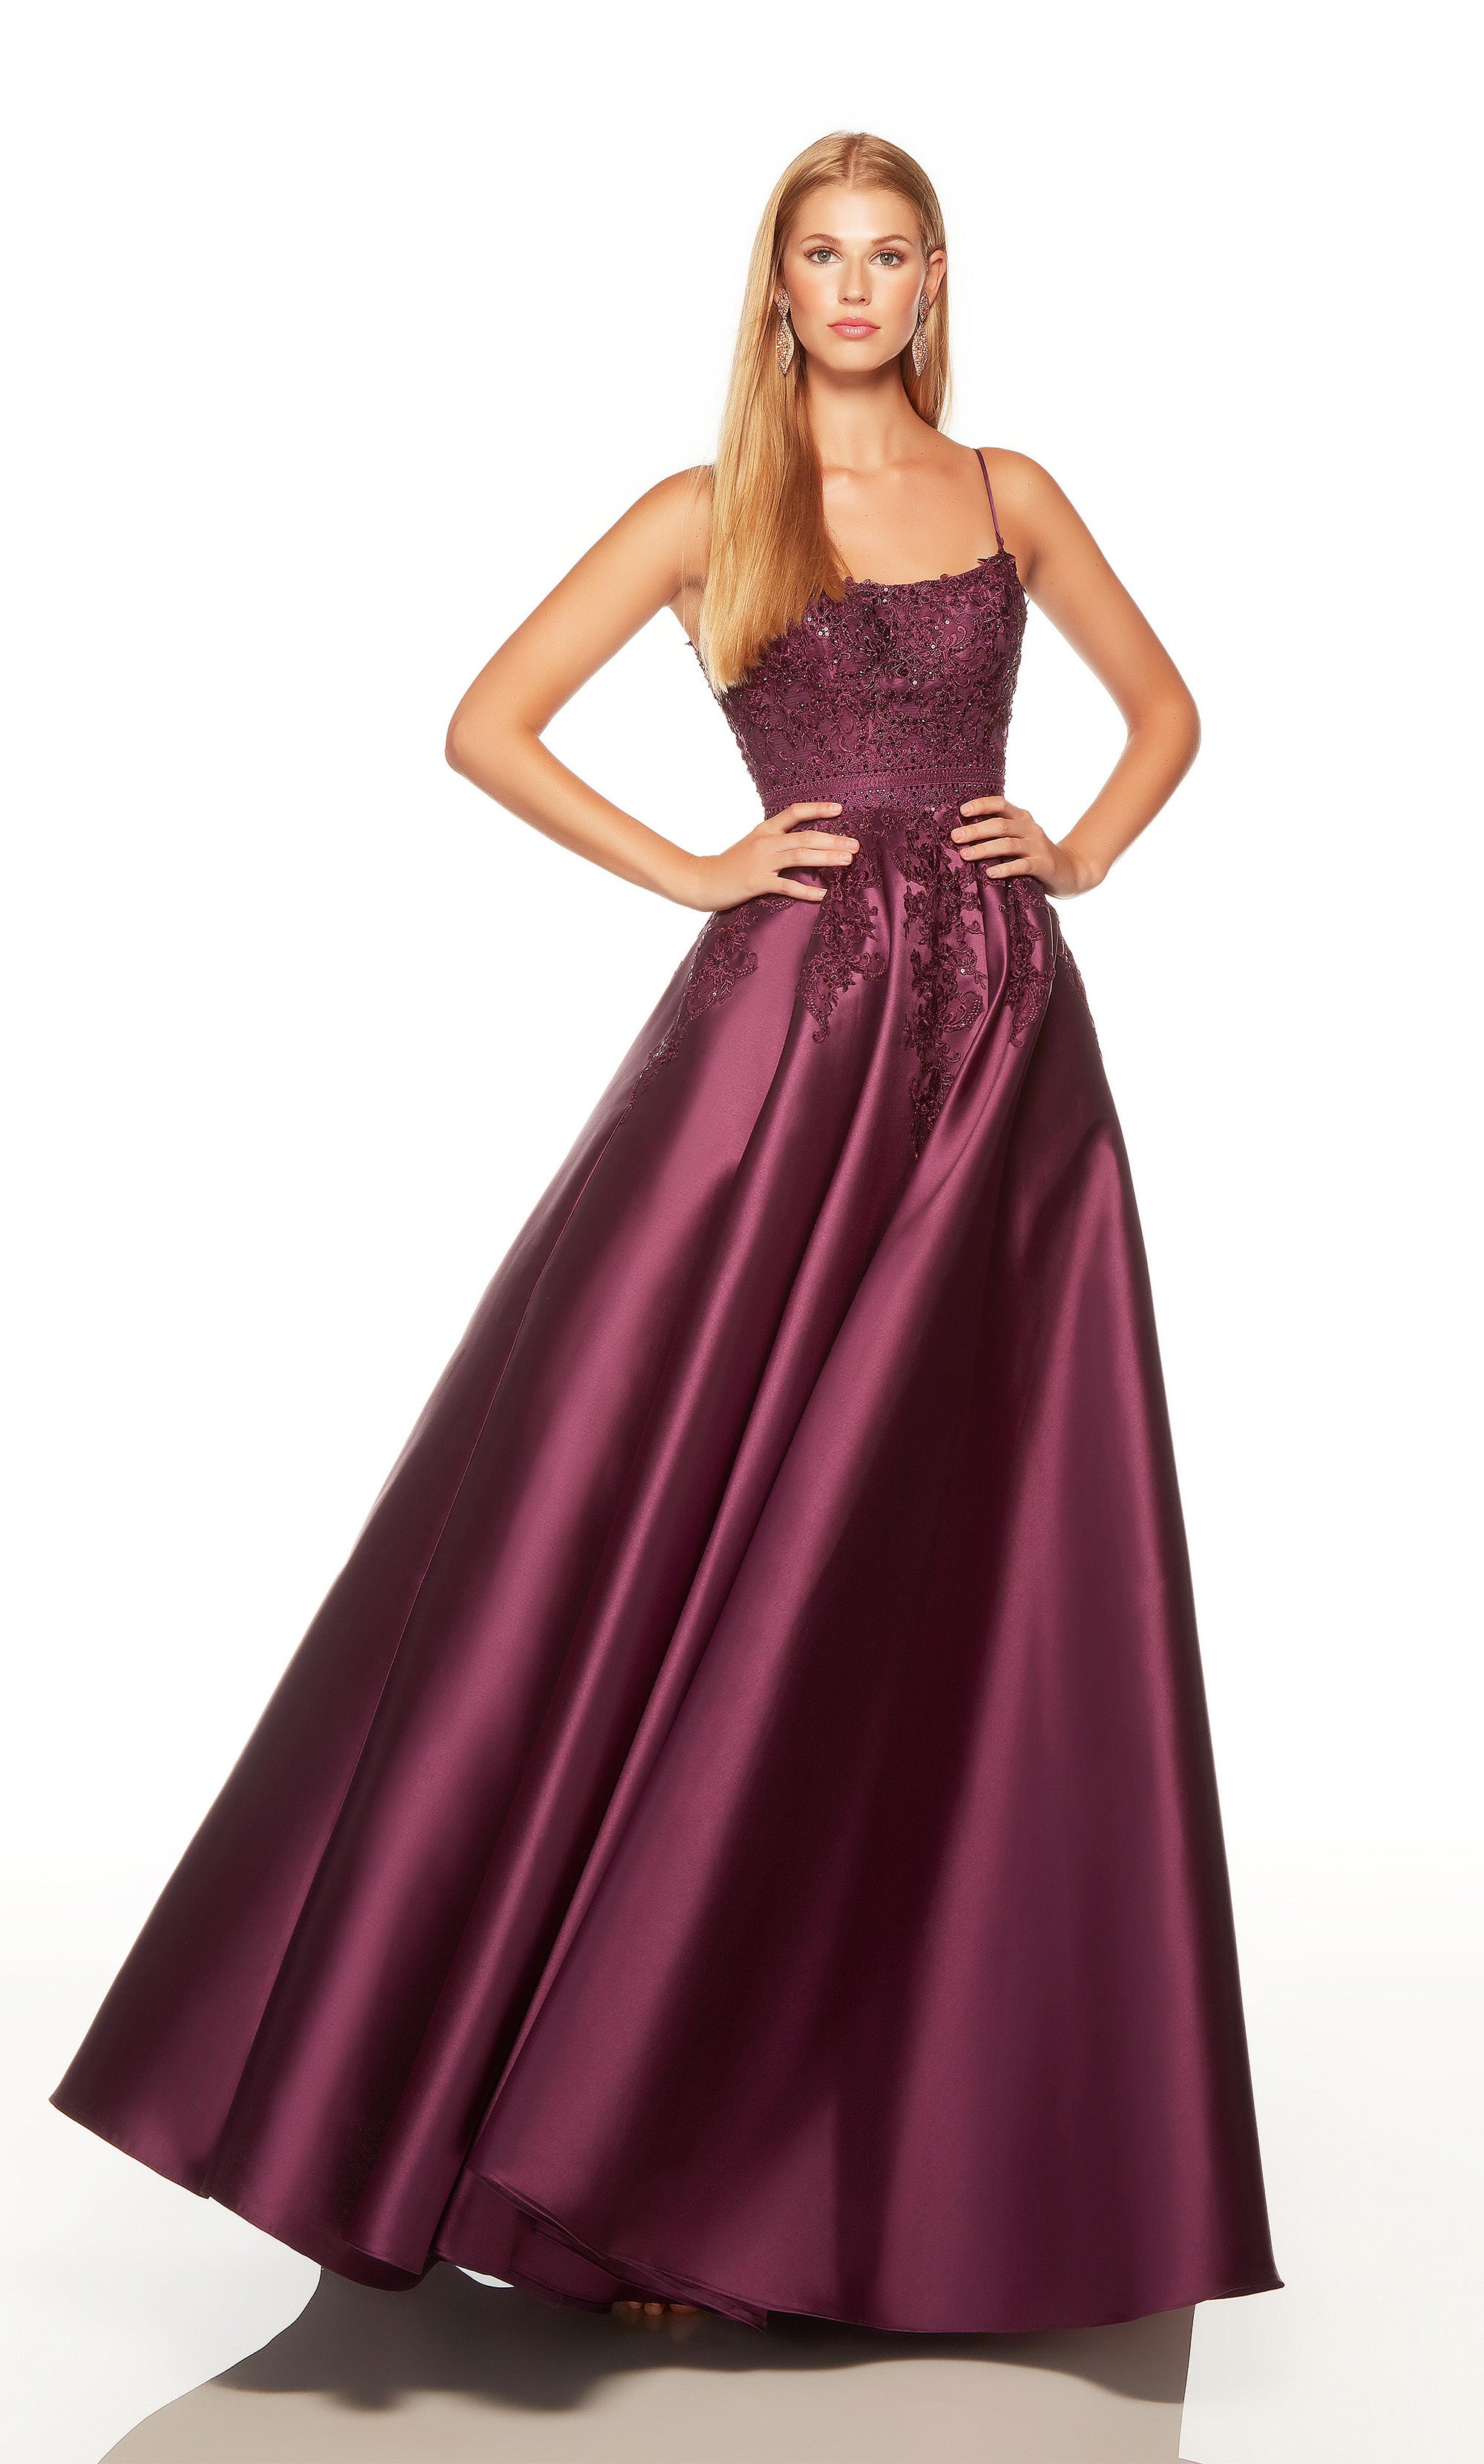 French Novelty: Clarisse 810180 Fitted Scoop Neck Prom Dress